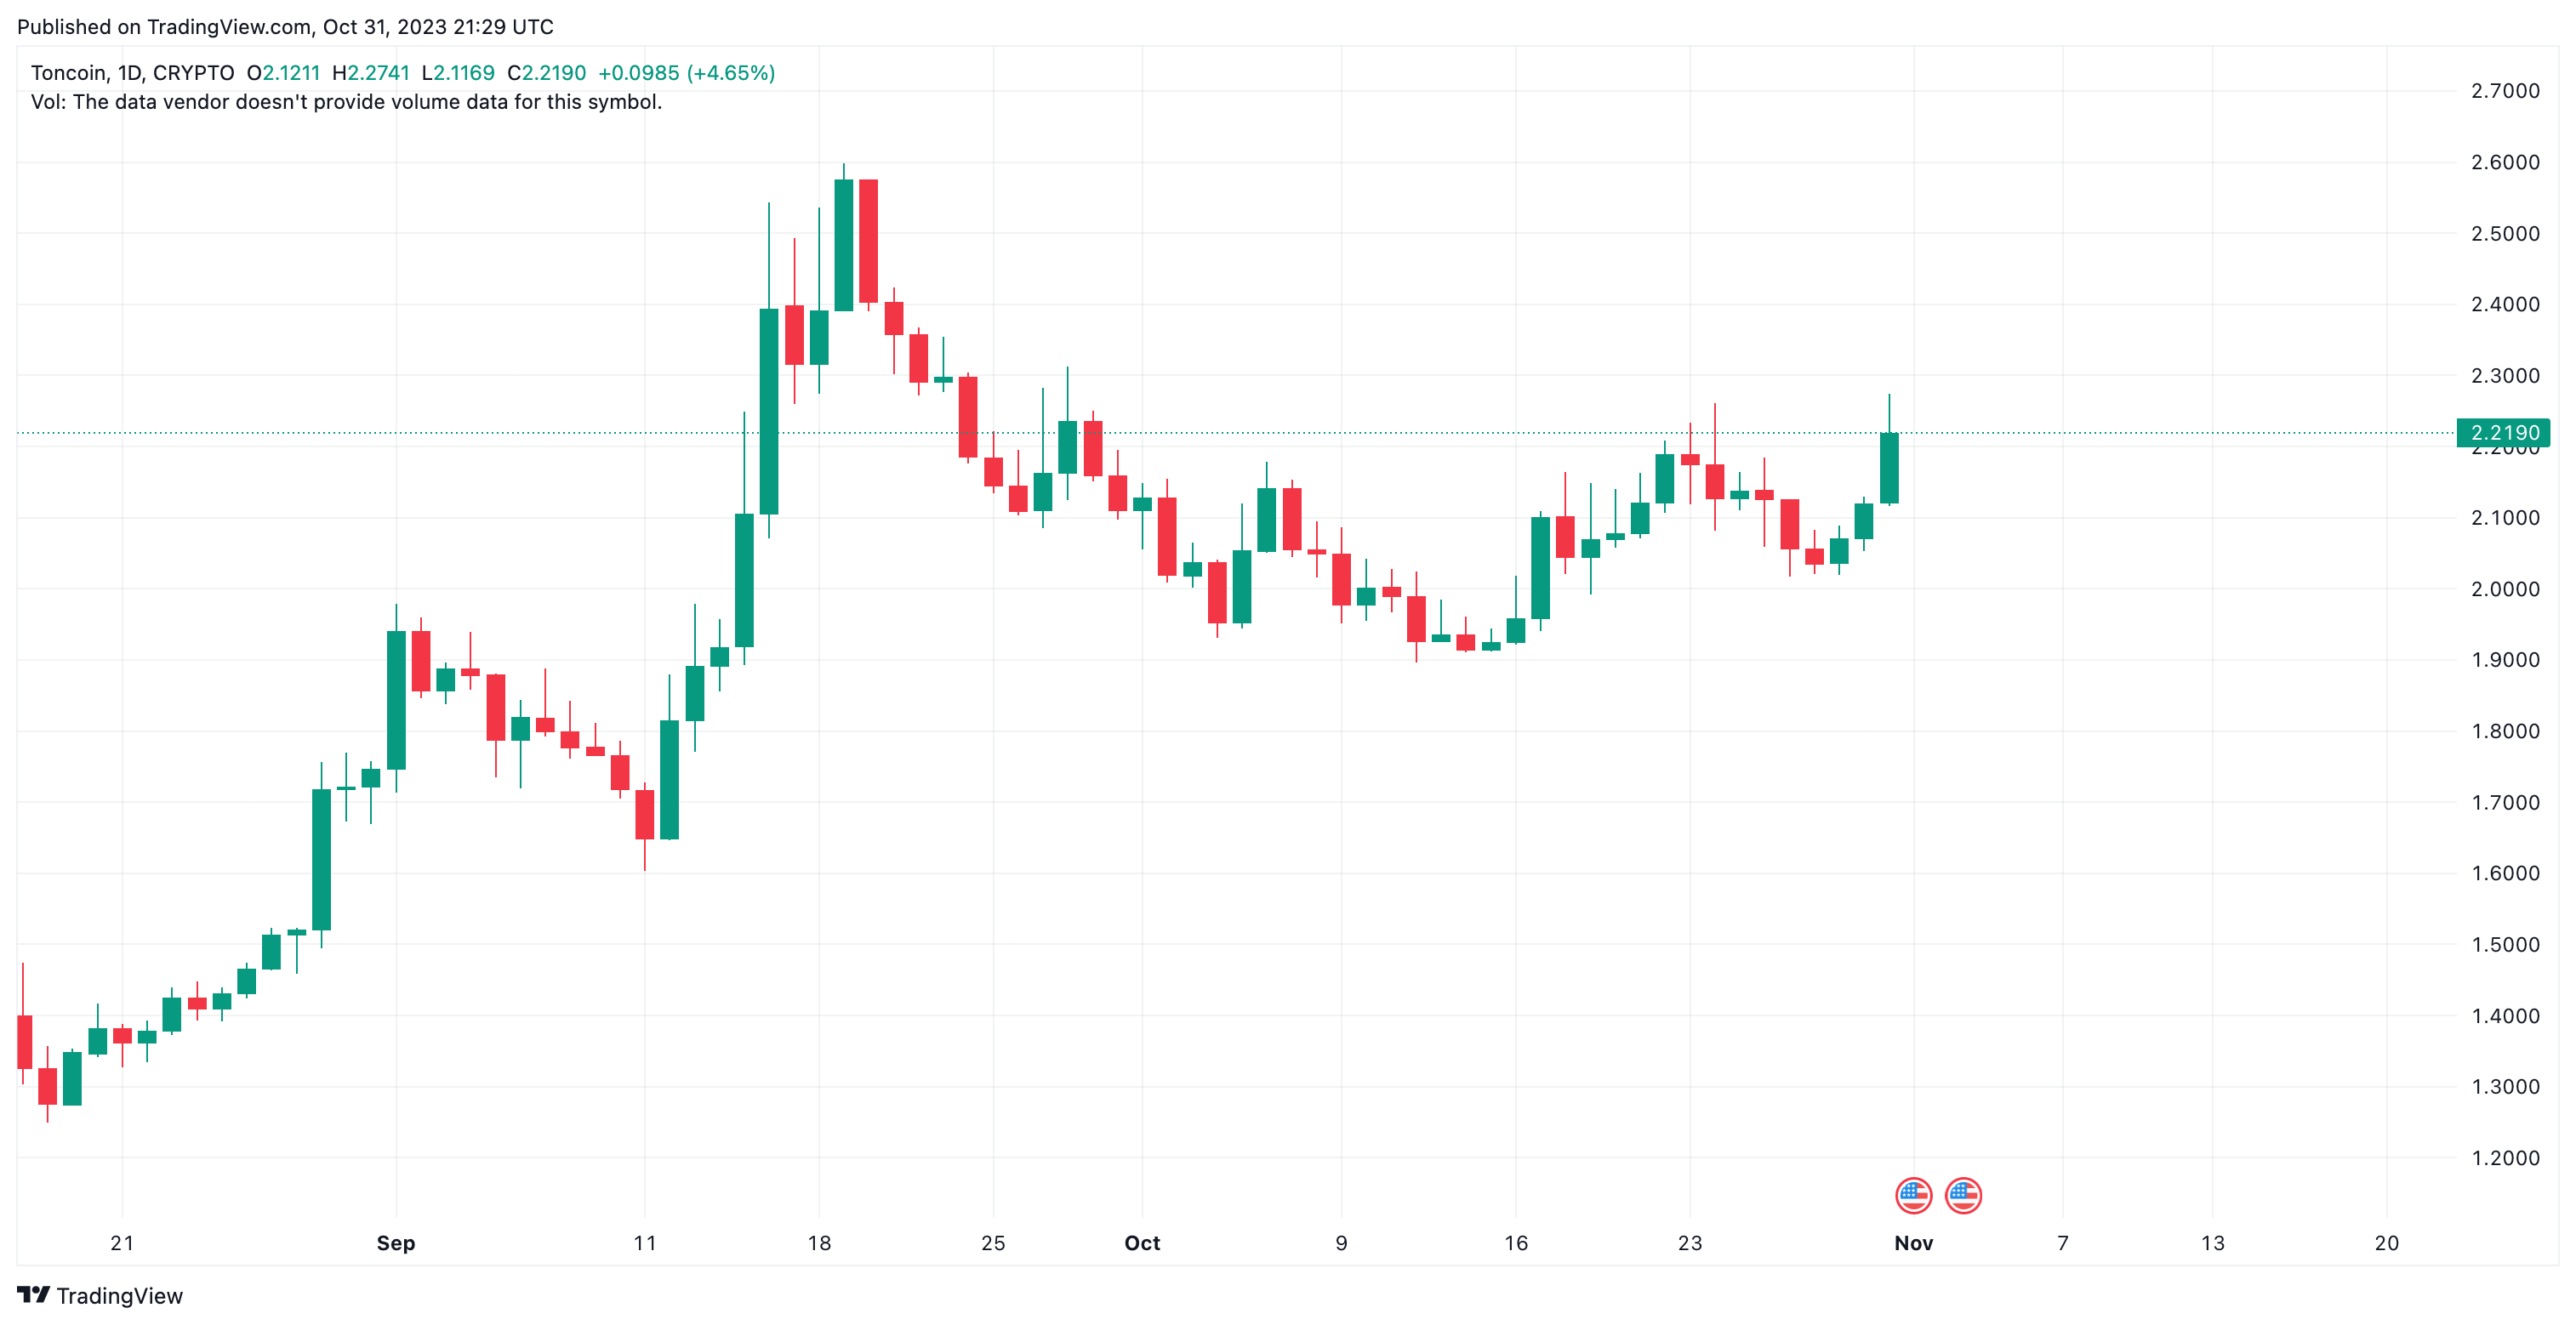 Ripple (XRP) Price Action, October 31, 2023.